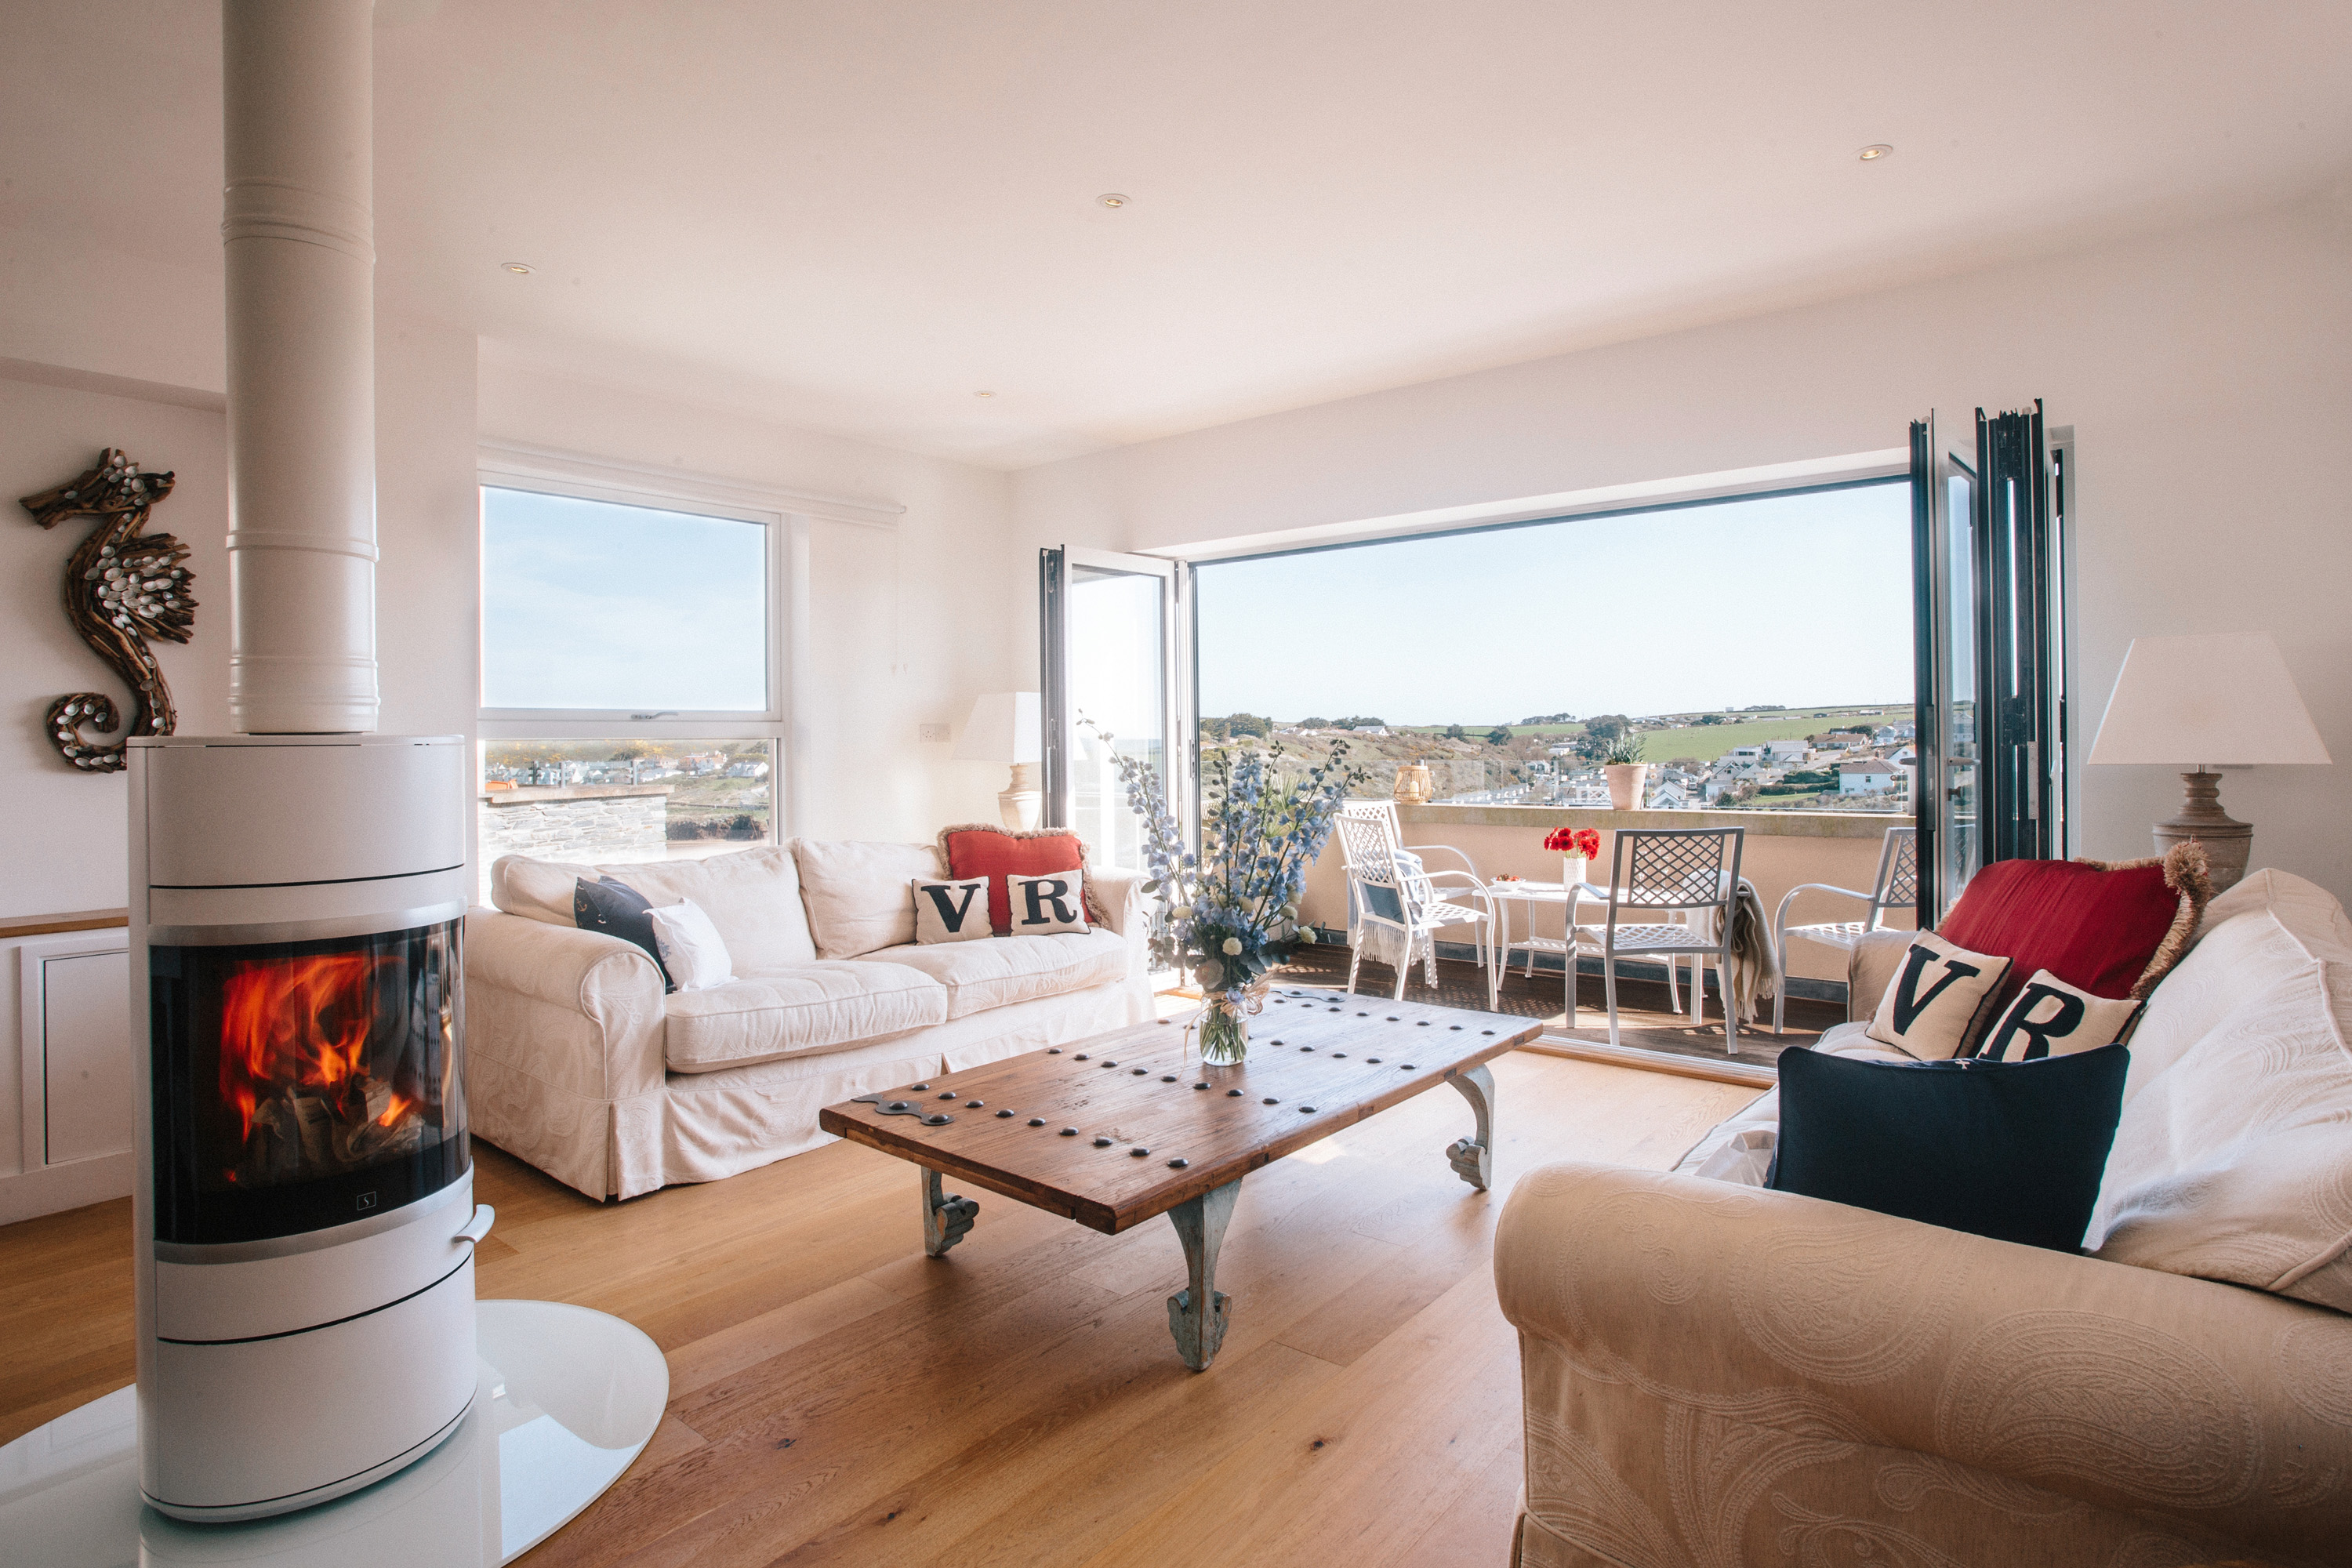 Living space in Vinnick Rock, a self-catering holiday home in Polzeath, North Cornwall